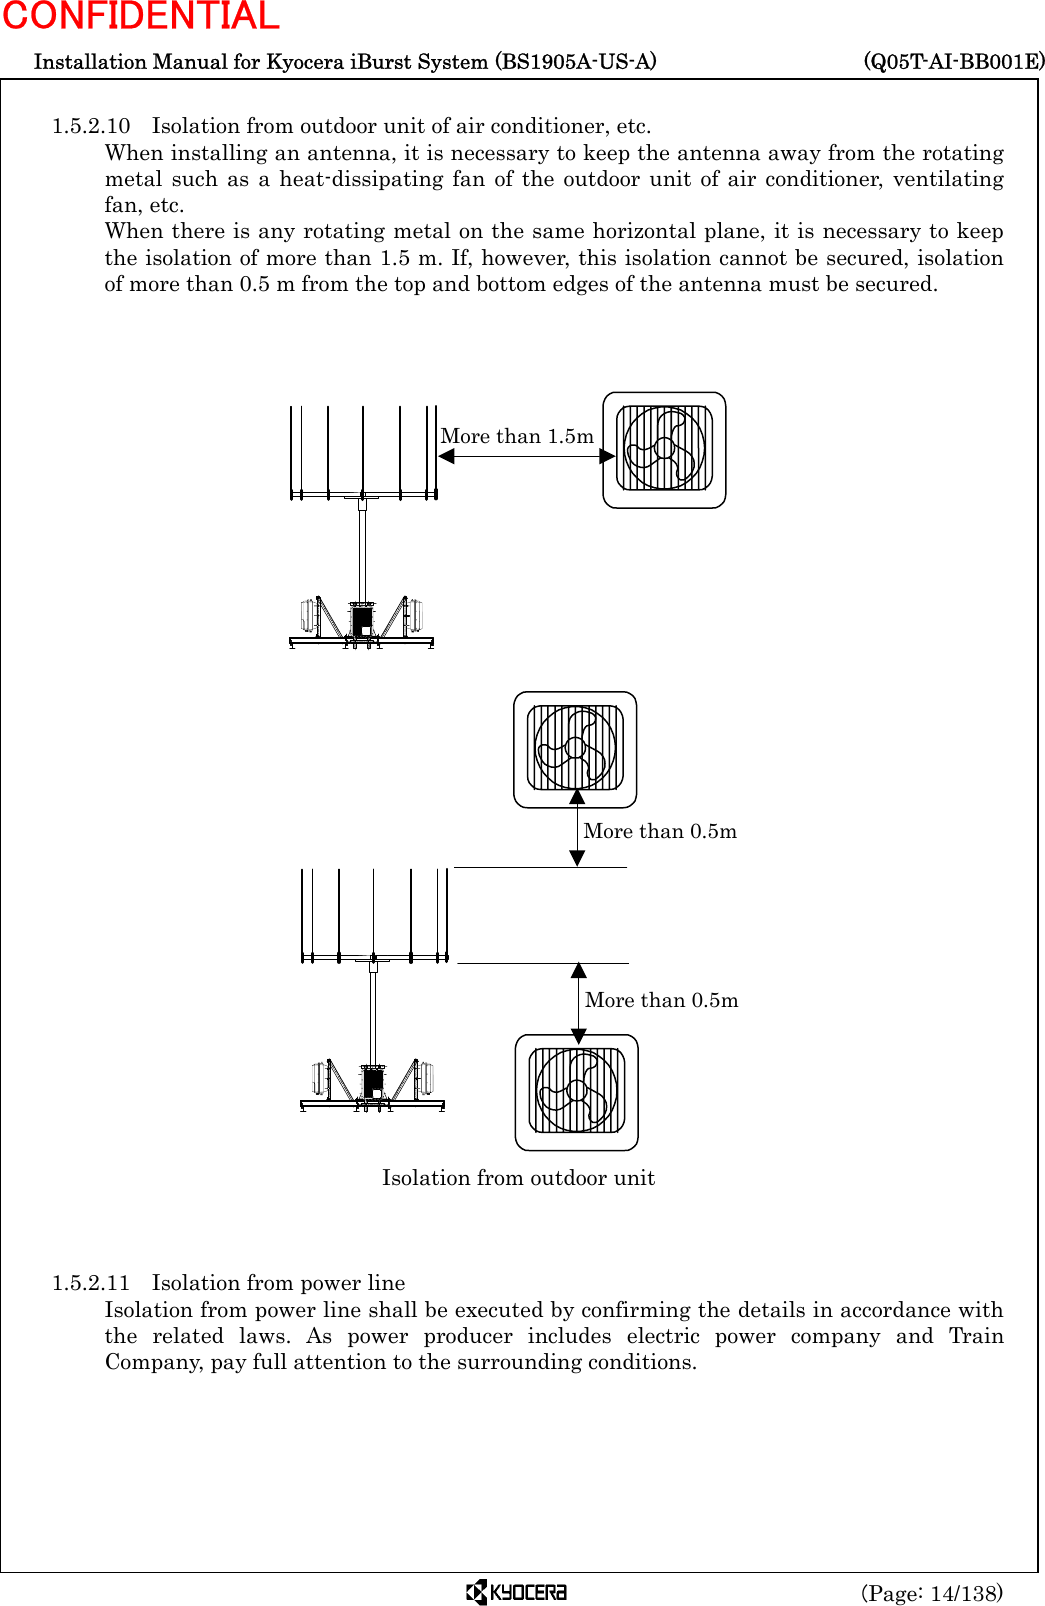  Installation Manual for Kyocera iBurst System (BS1905A-US-A)     (Q05T-AI-BB001E) (Page: 14/138) CONFIDENTIAL  1.5.2.10 Isolation from outdoor unit of air conditioner, etc. When installing an antenna, it is necessary to keep the antenna away from the rotating metal such as a heat-dissipating fan of the outdoor unit of air conditioner, ventilating fan, etc.   When there is any rotating metal on the same horizontal plane, it is necessary to keep the isolation of more than 1.5 m. If, however, this isolation cannot be secured, isolation of more than 0.5 m from the top and bottom edges of the antenna must be secured.                                                                                Isolation from outdoor unit    1.5.2.11  Isolation from power line Isolation from power line shall be executed by confirming the details in accordance with the related laws. As power producer includes electric power company and Train Company, pay full attention to the surrounding conditions.   More than 1.5m More than 0.5m More than 0.5m 